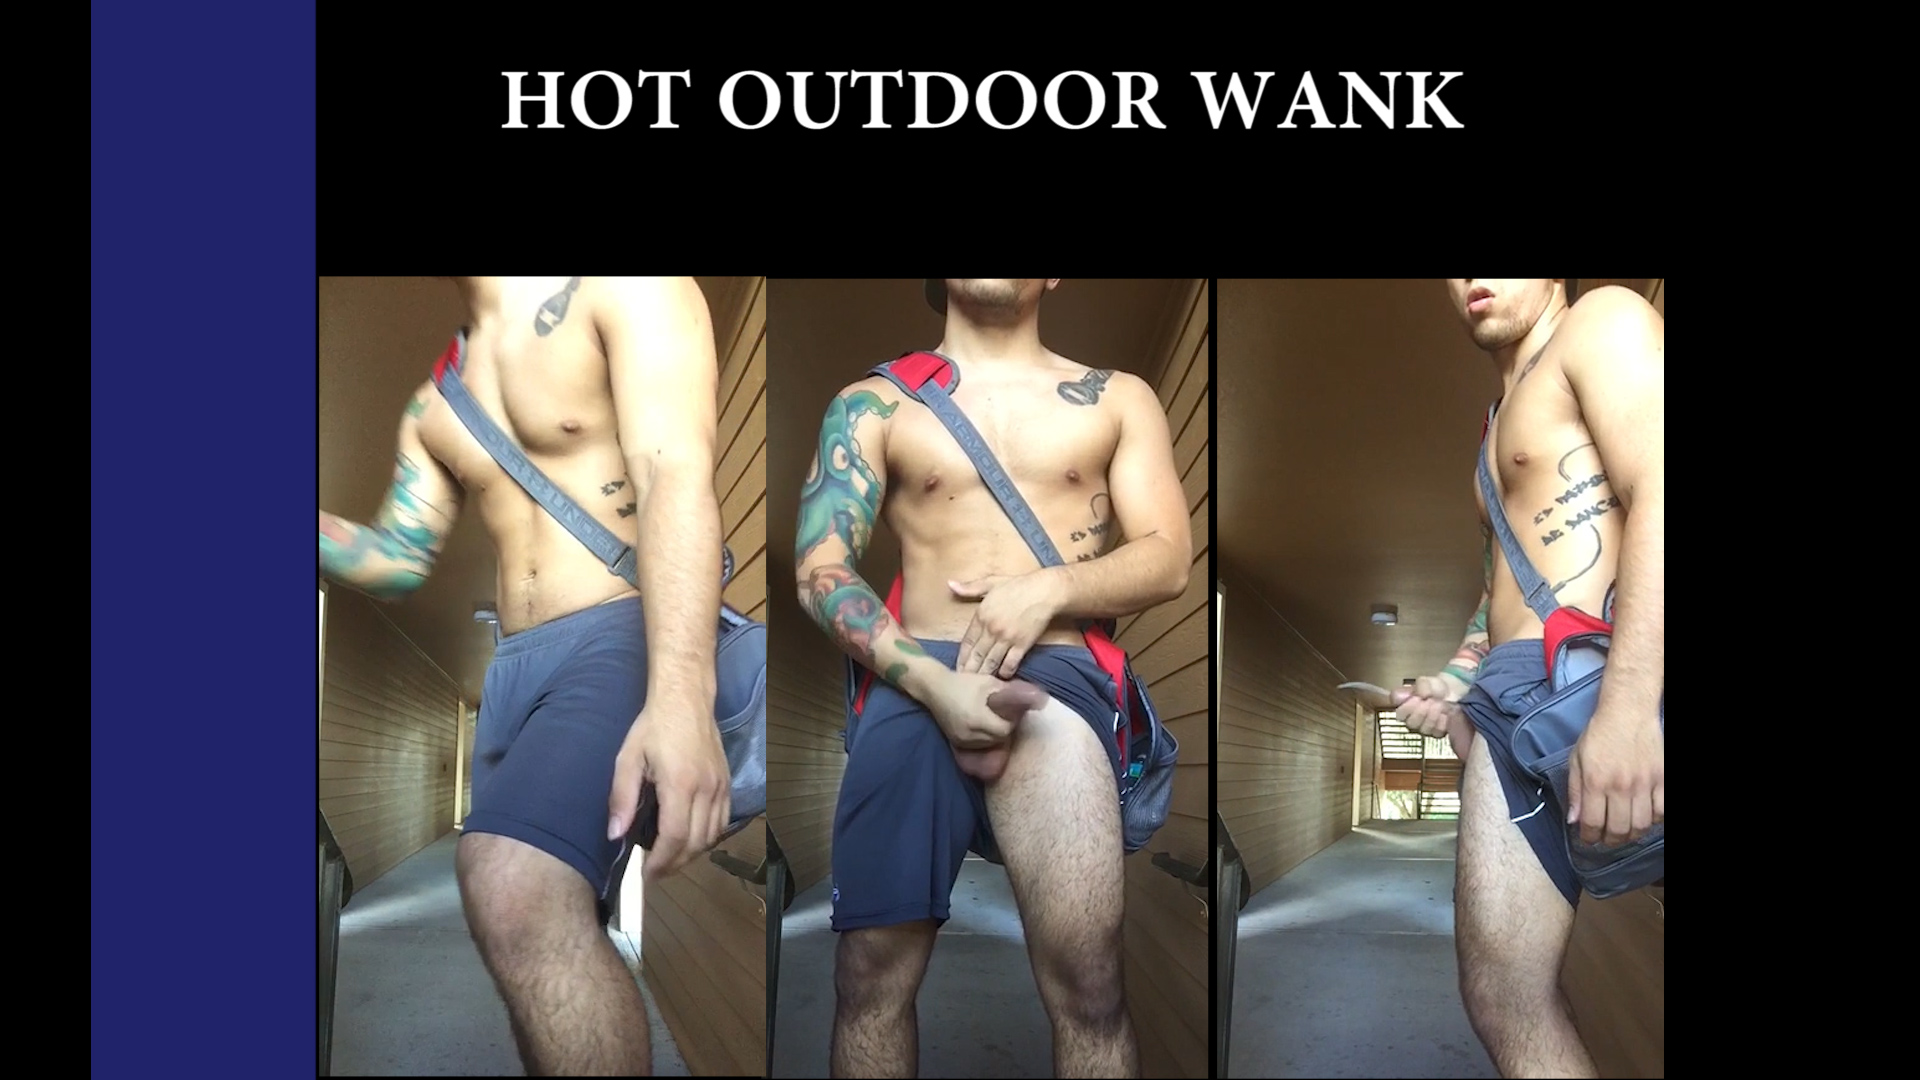 Tattooed Guy With Hot Outdoor Wank